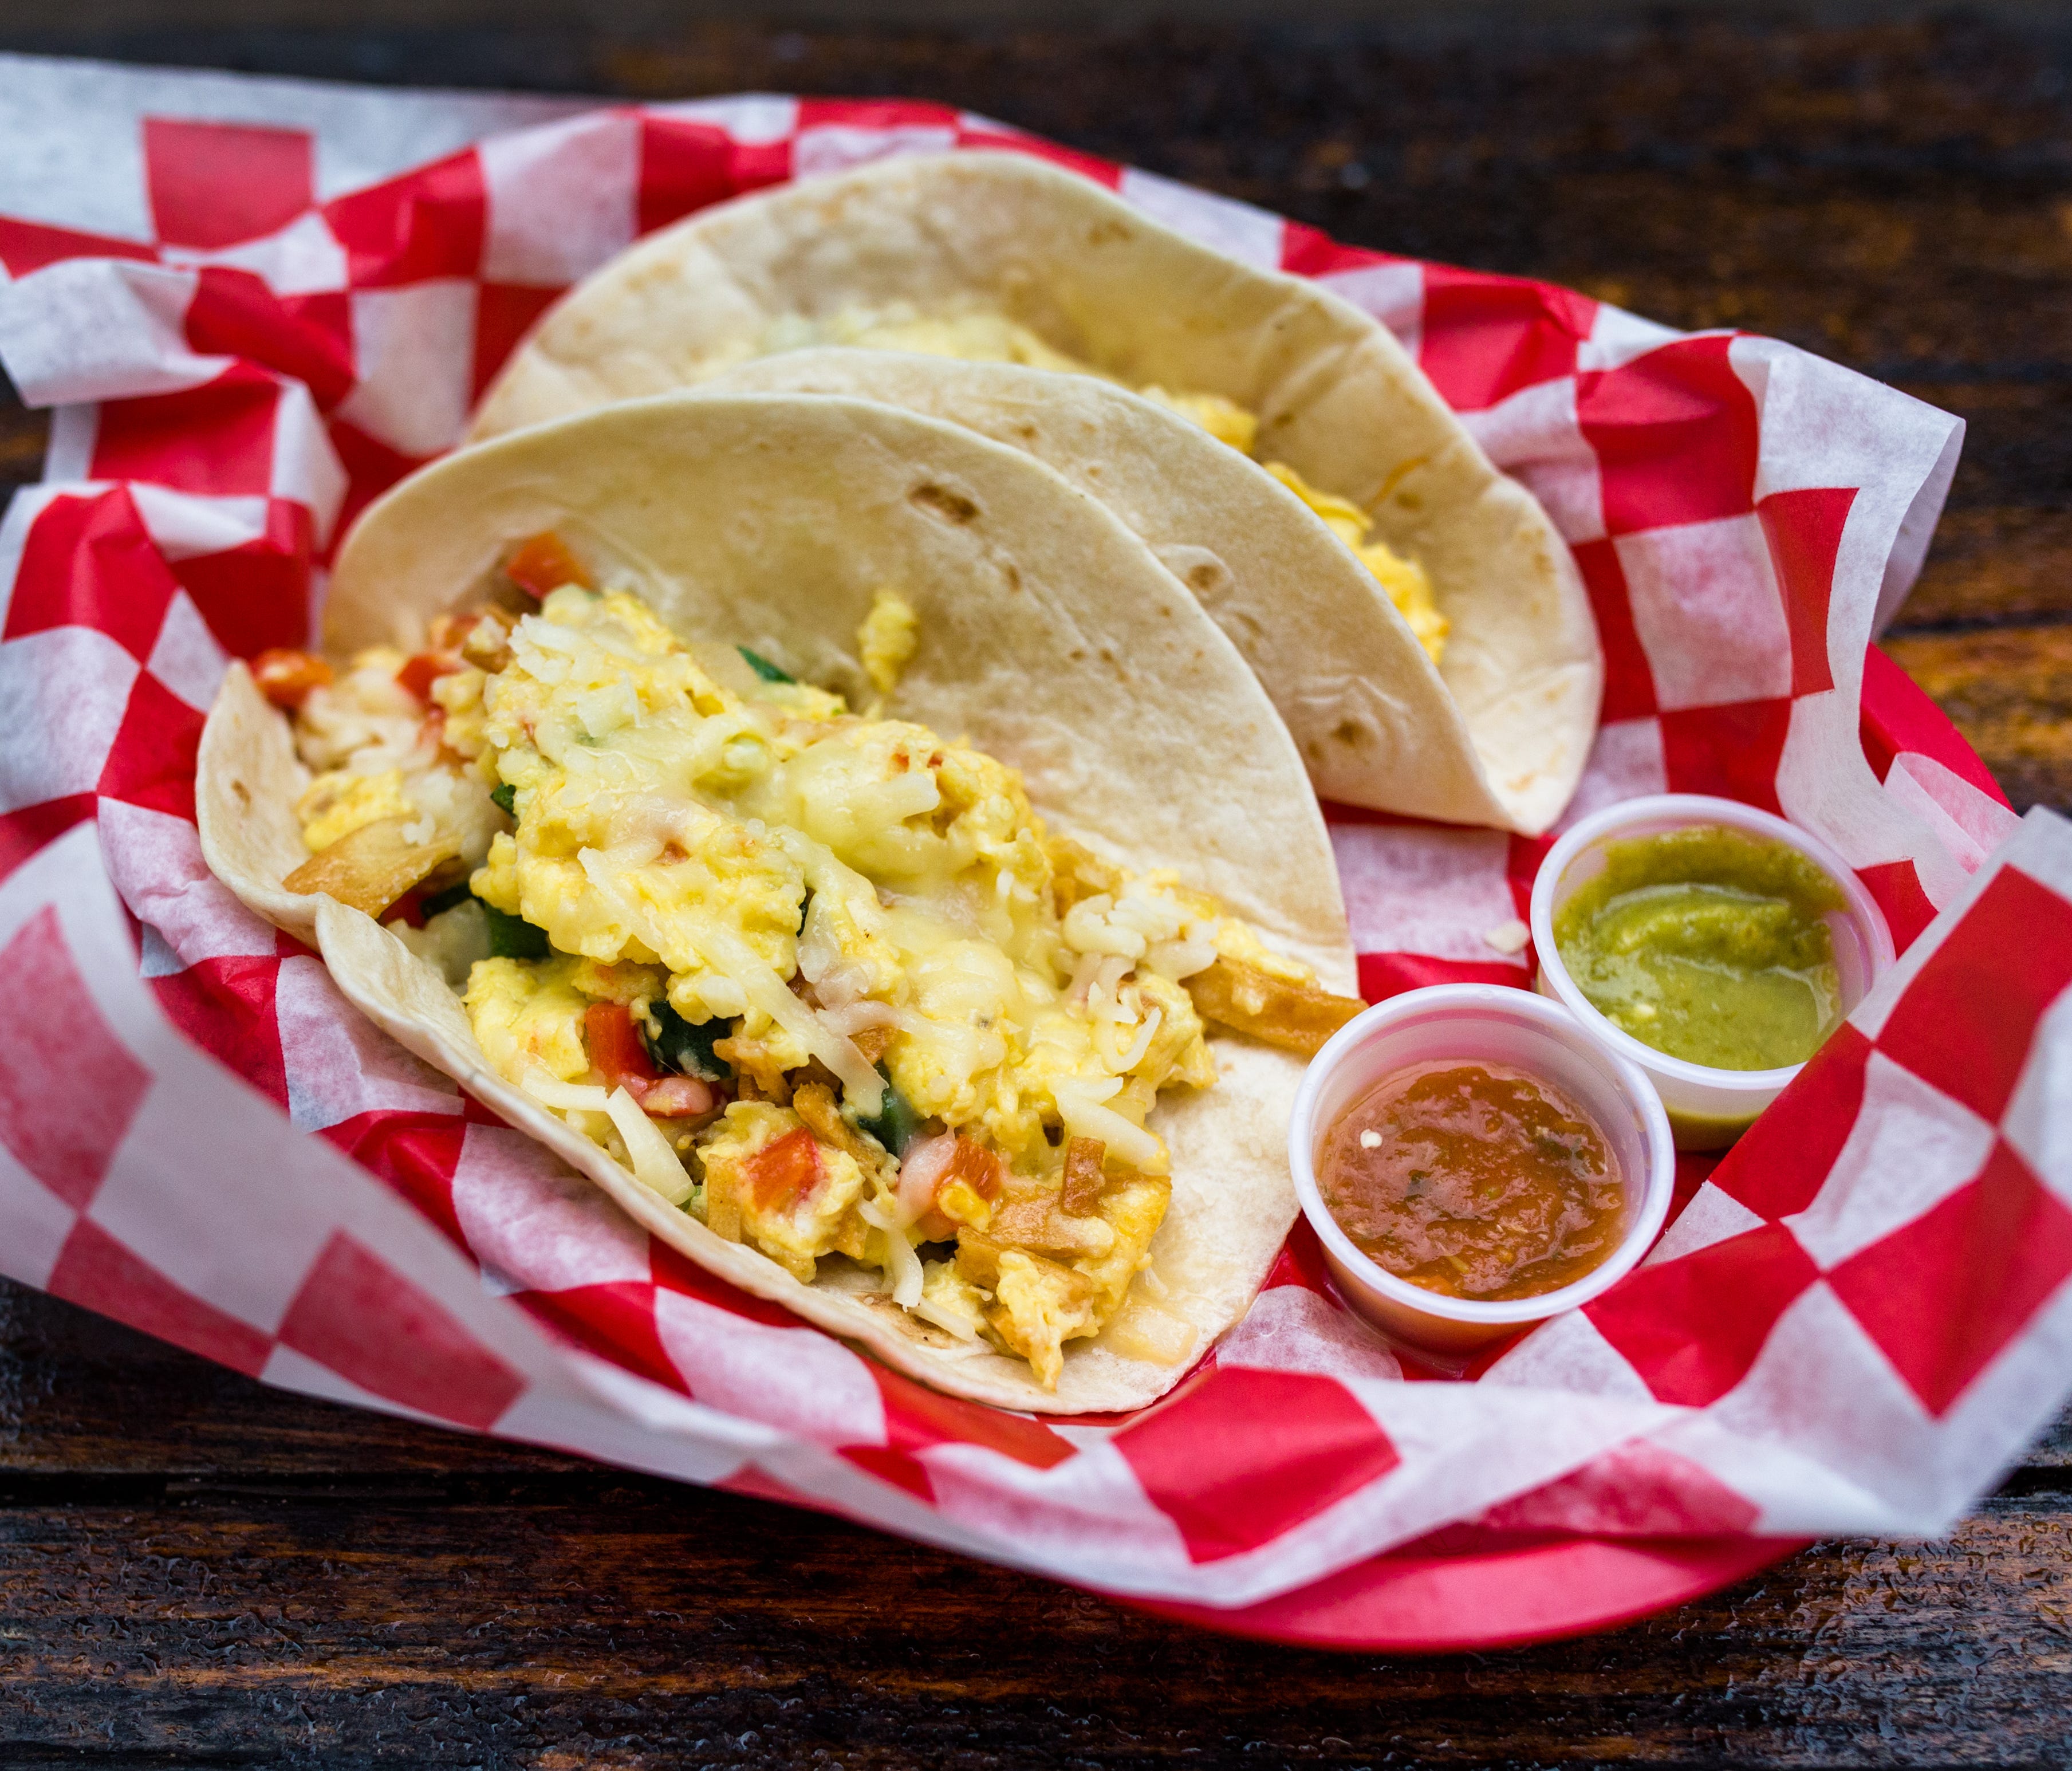 In addition to coffee, Jo's serves hot breakfast tacos, starting at 8 a.m. and lasting until they sell out, which can be as early as an hour into breakfast service.